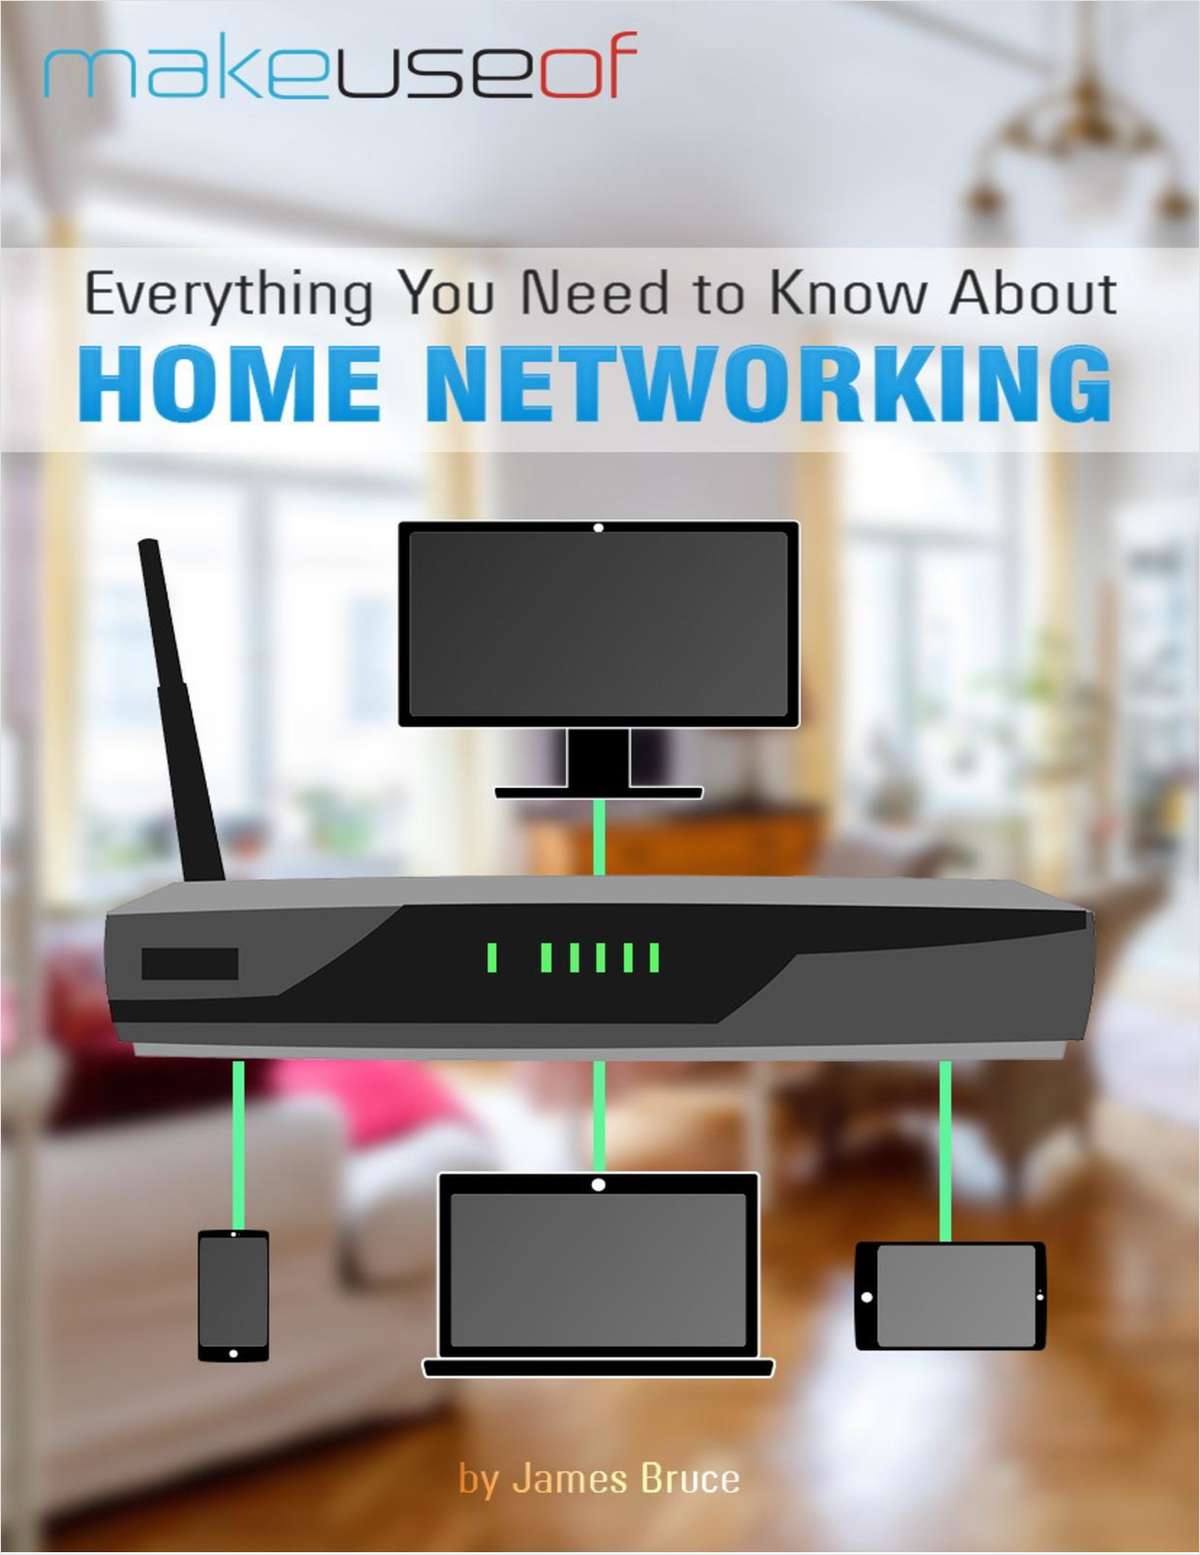 Everything You Need to Know About Home Networking